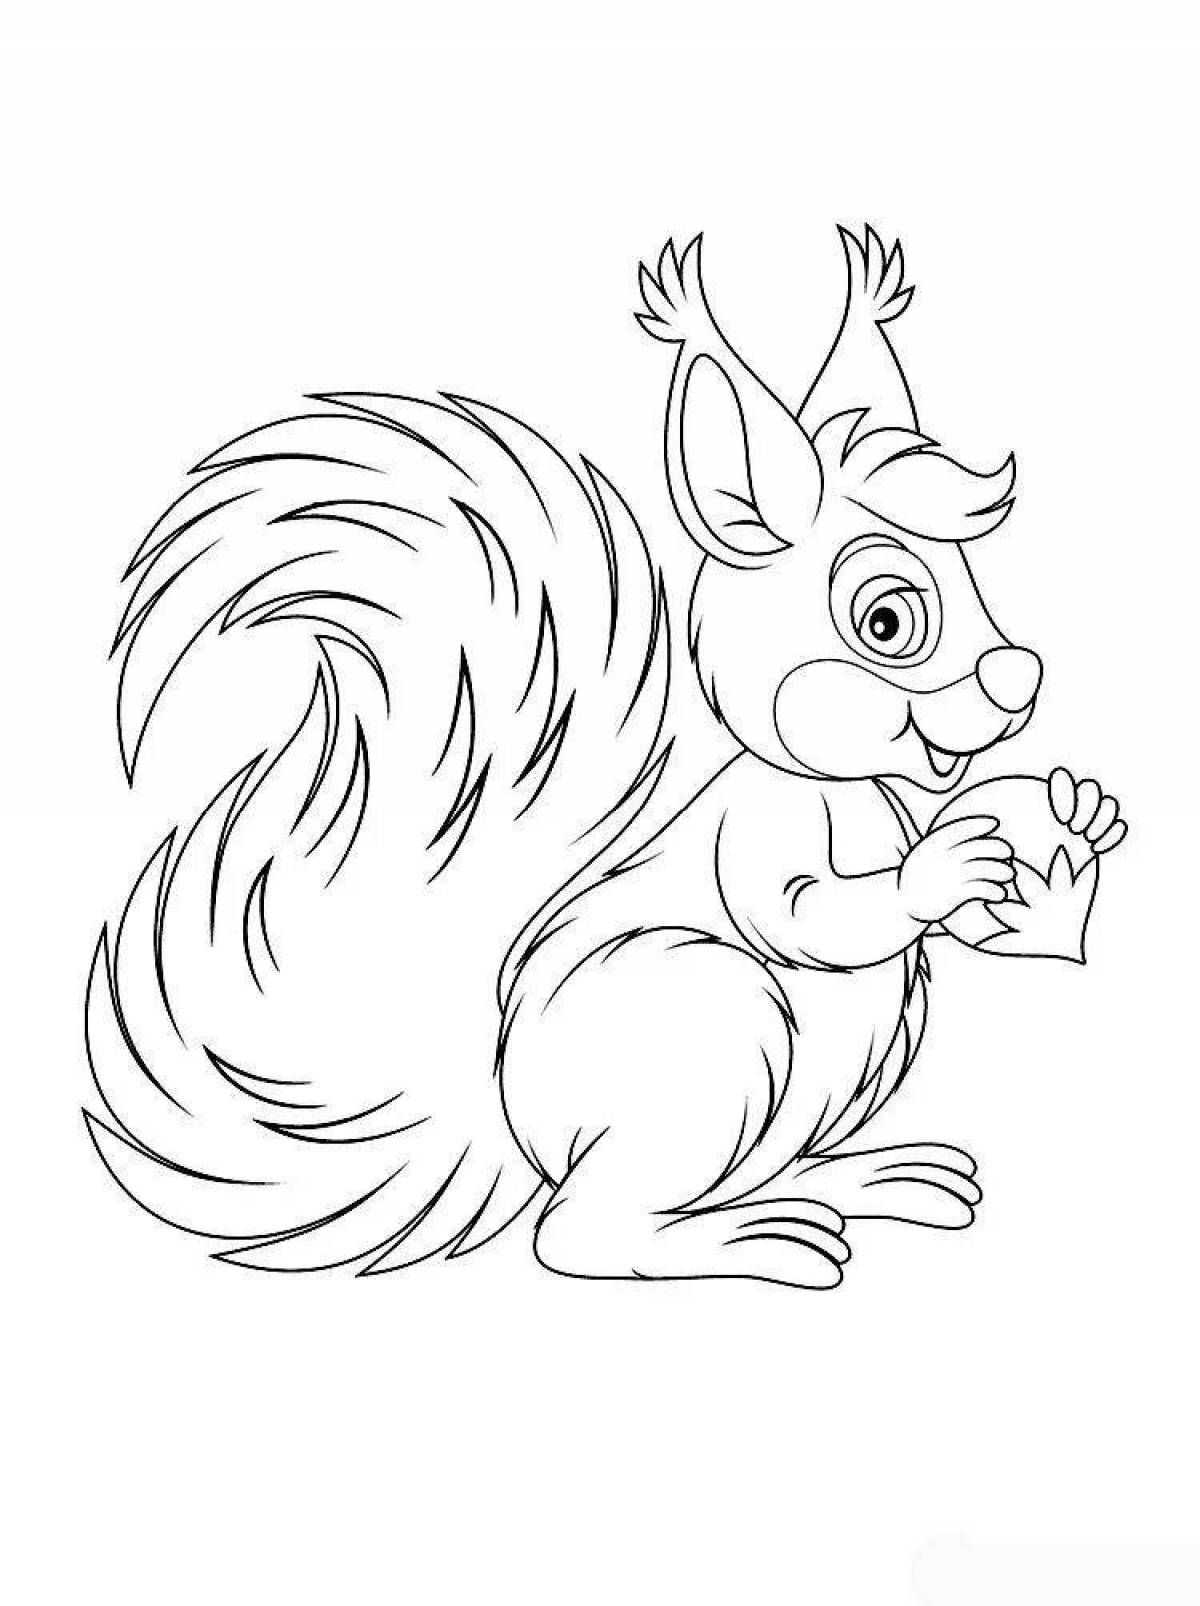 Colourful coloring squirrel for children 3-4 years old